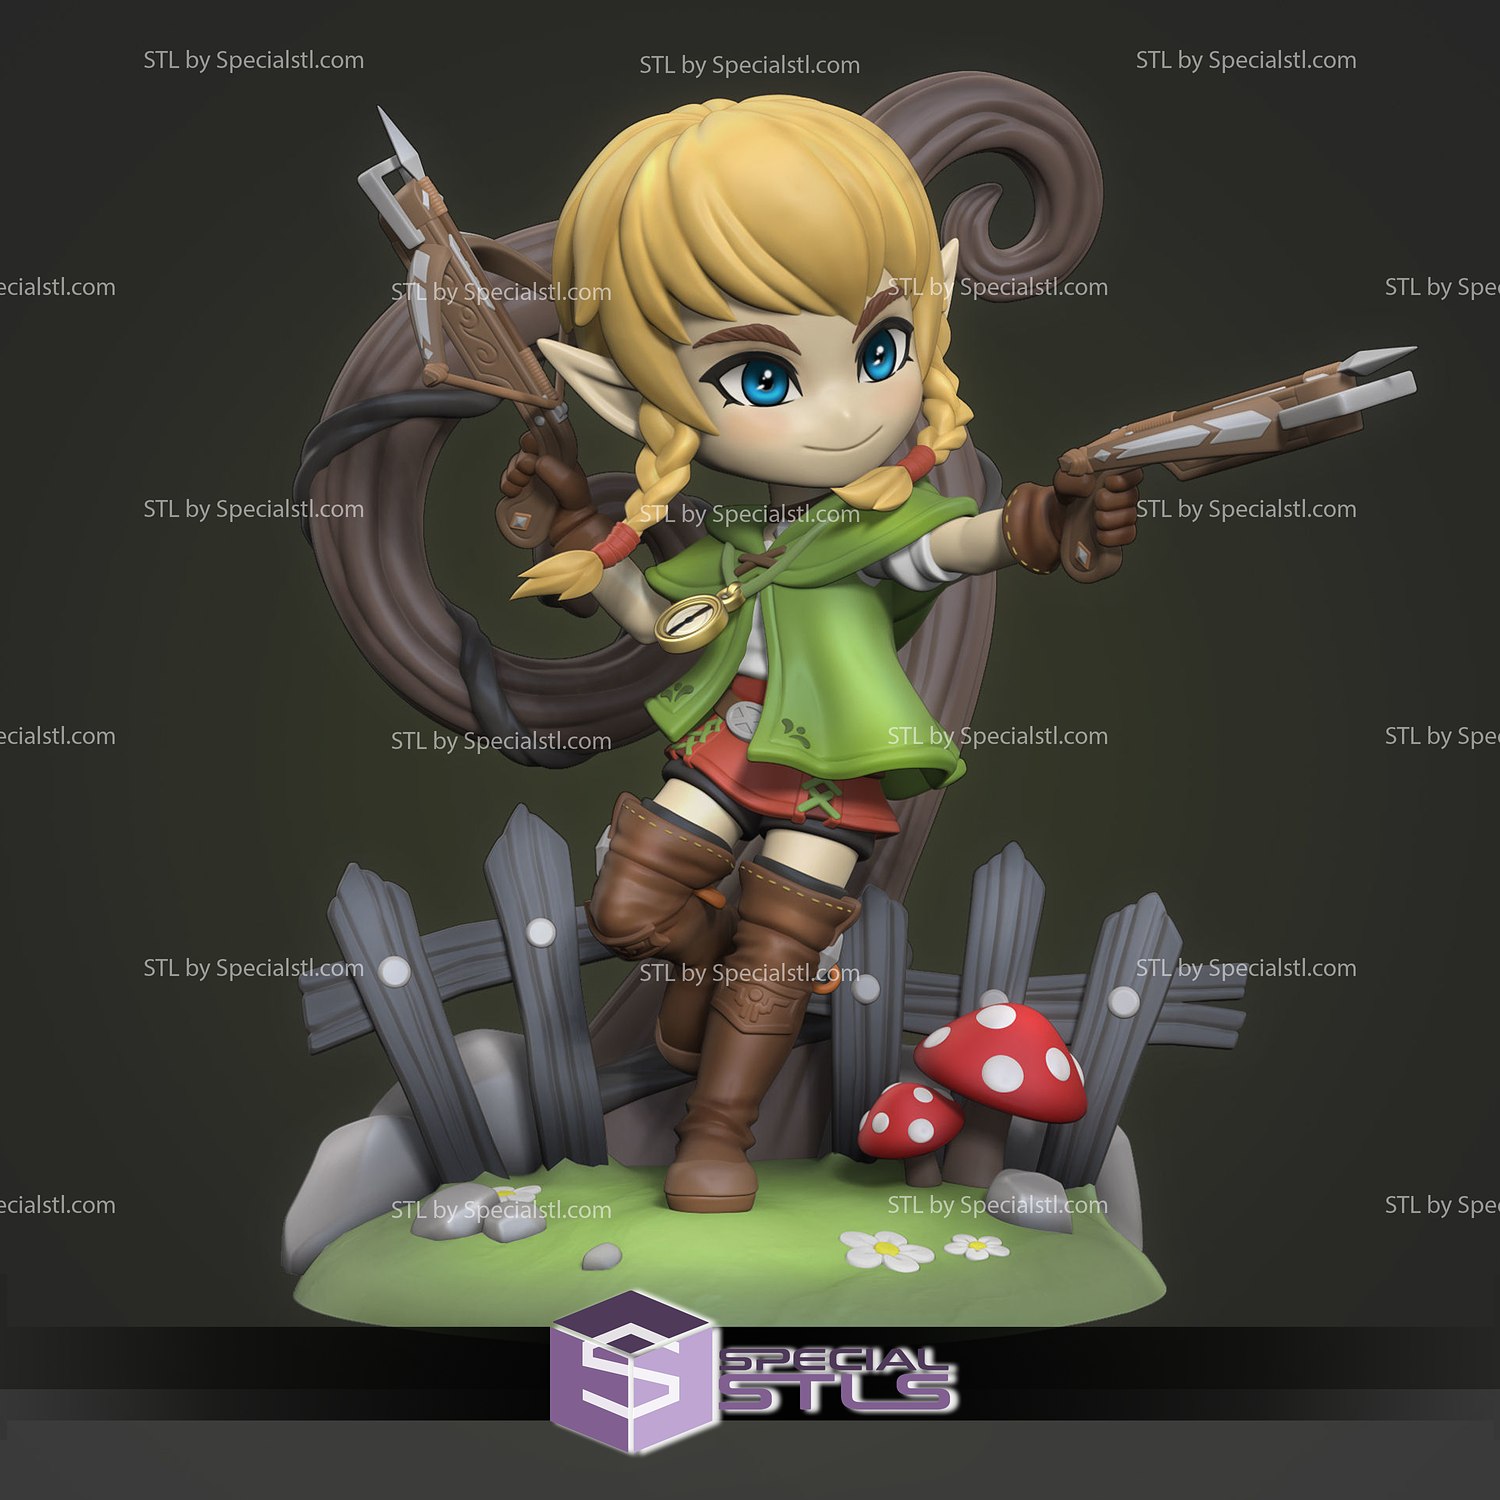 Linkle Chibi from Hyrule Warriors